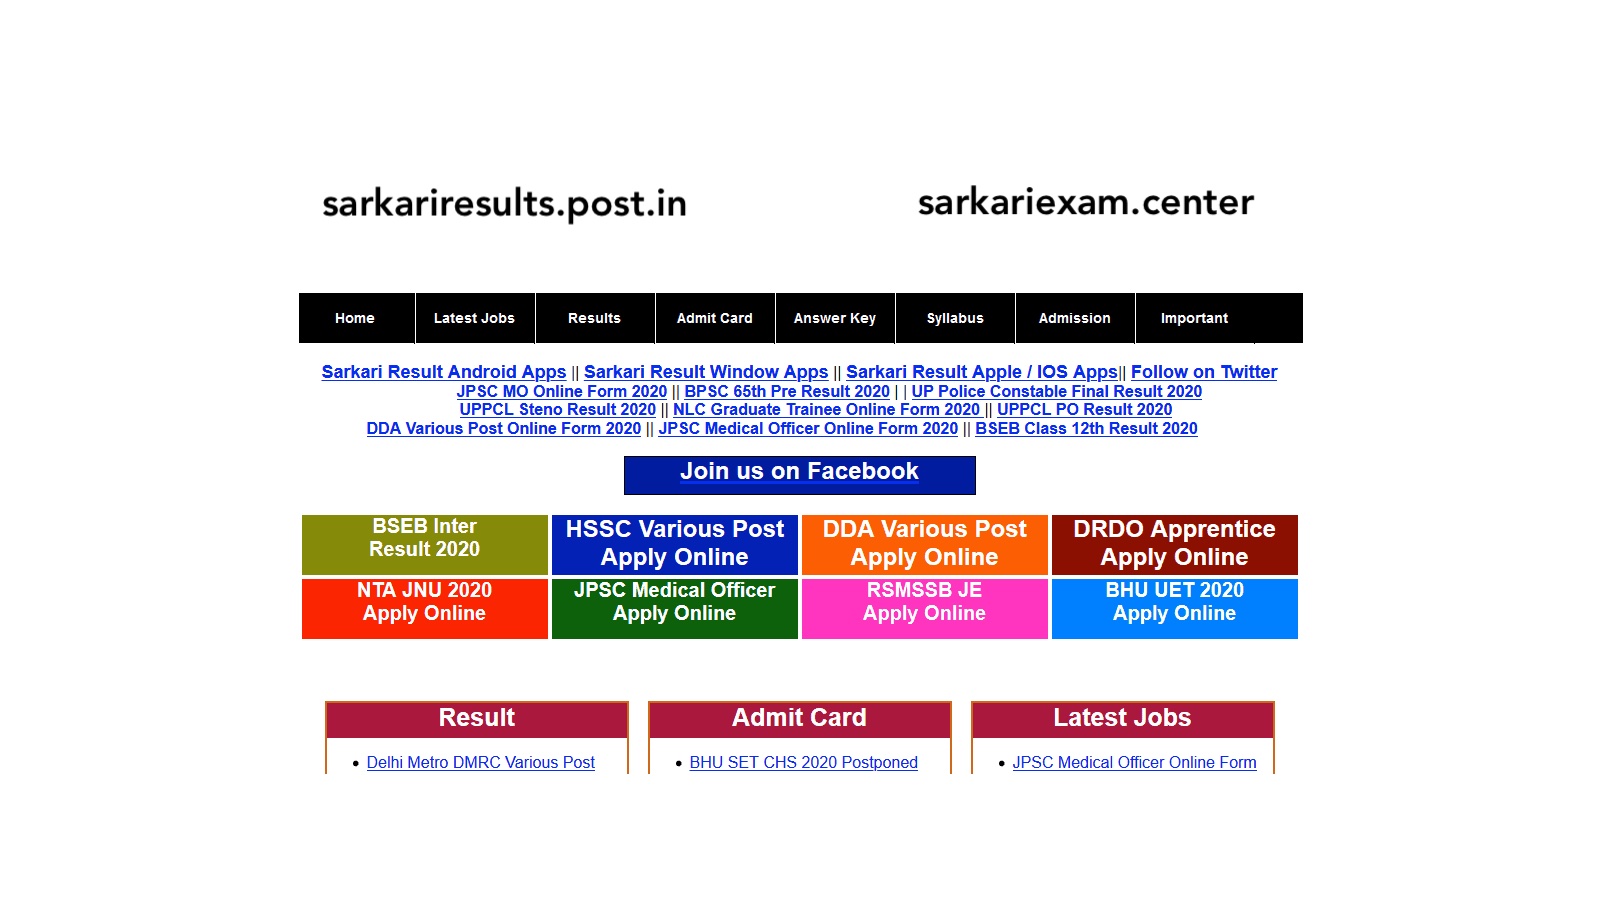 The Ultimate Guide to Sarkari Results